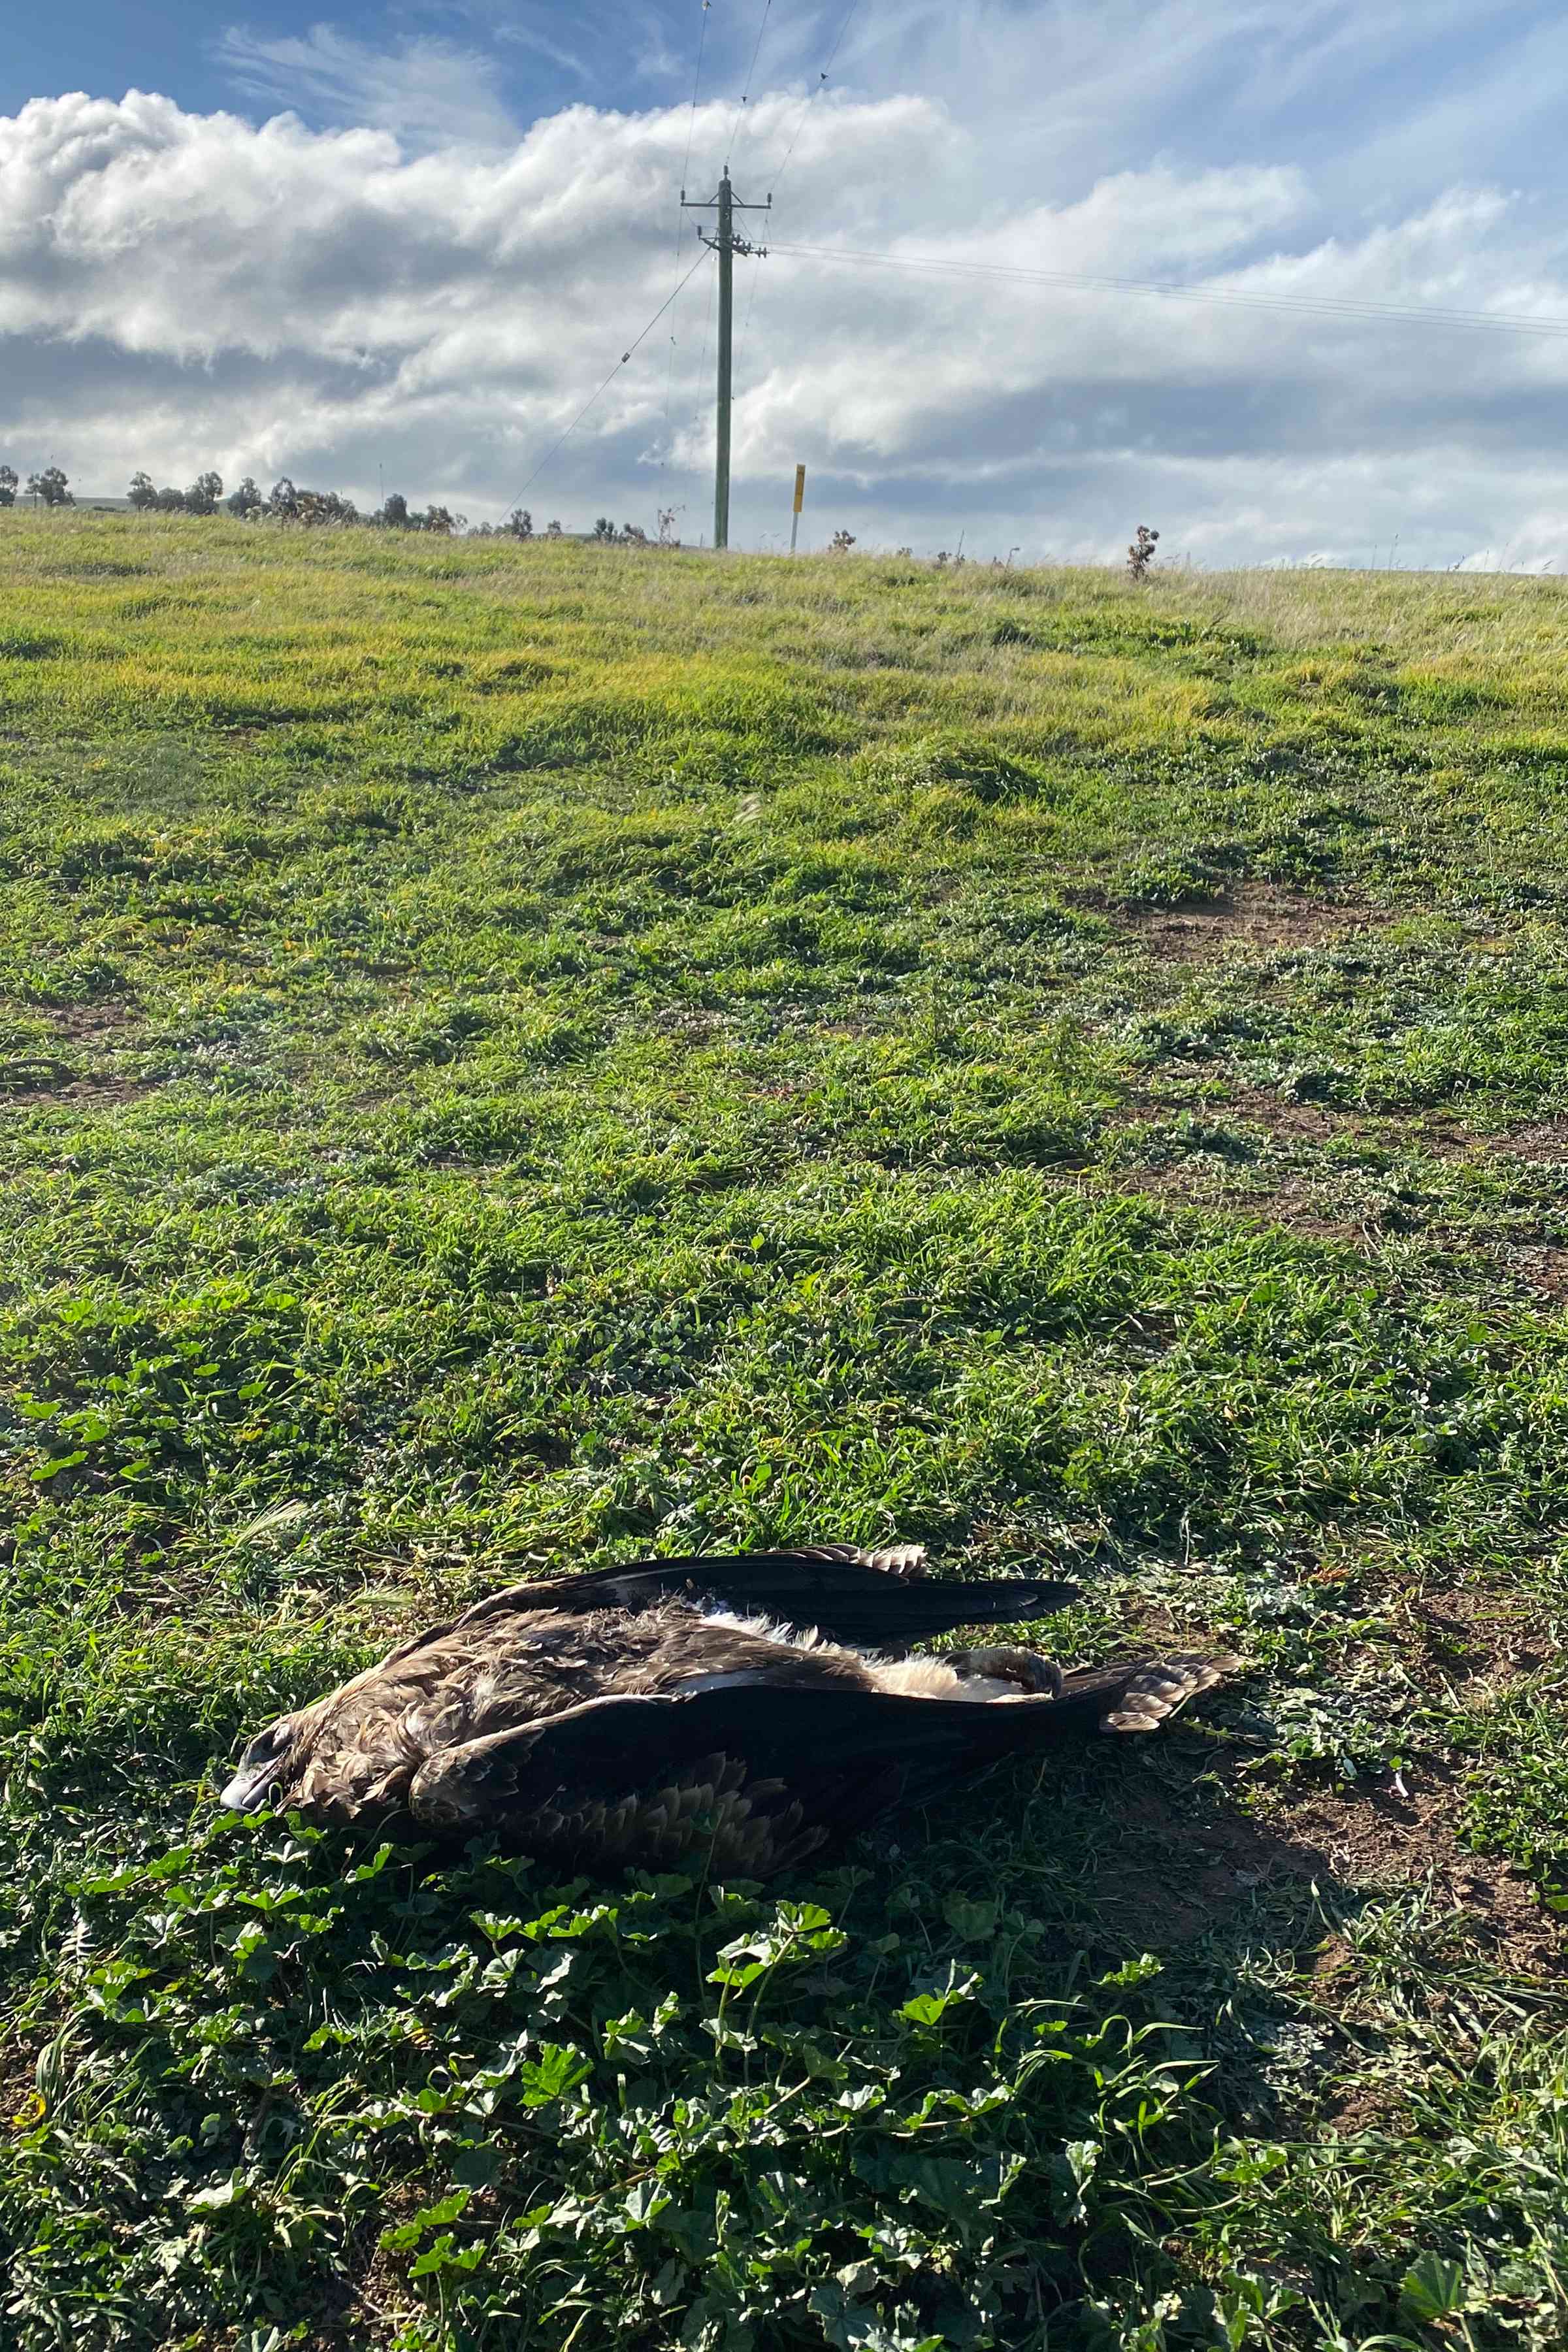 The carcass of an electrocuted eagle lies on lush paddock grass in front of a powerpole. Photo: Michael Dempsey.